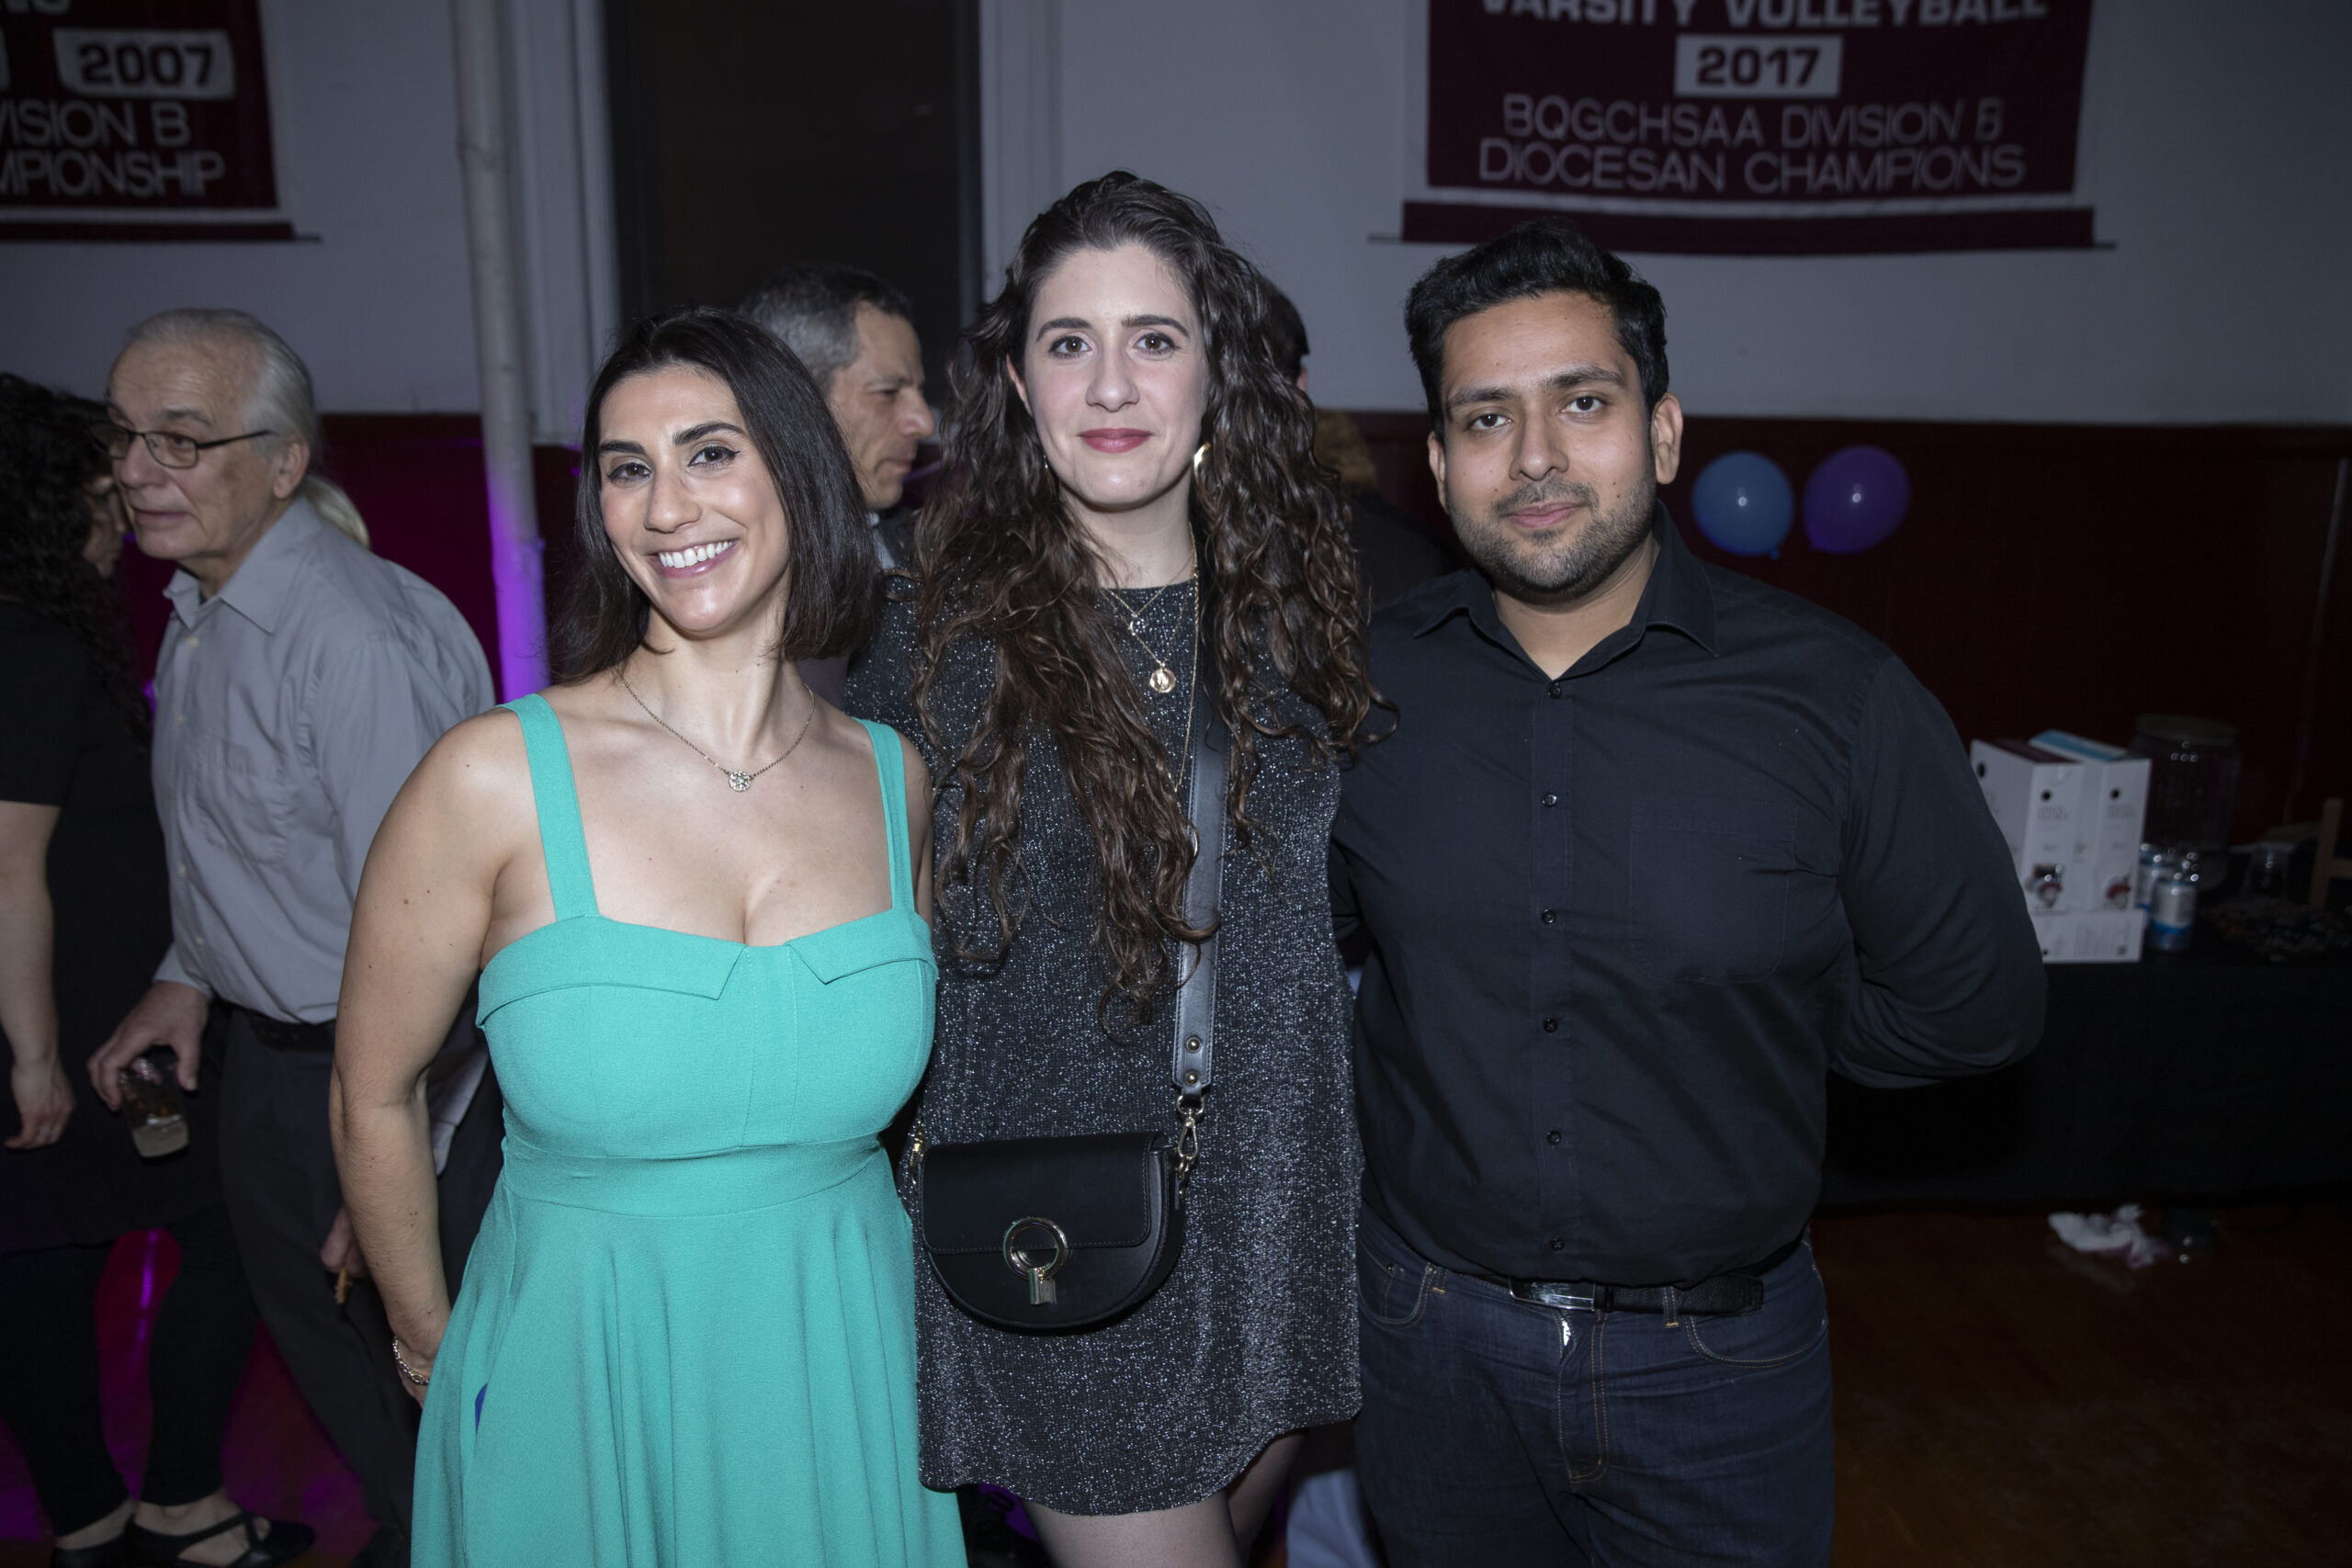 Jacquelina Abelson, Almudena Olid Gonzalez and Basin Asher at BCCO swing gala.